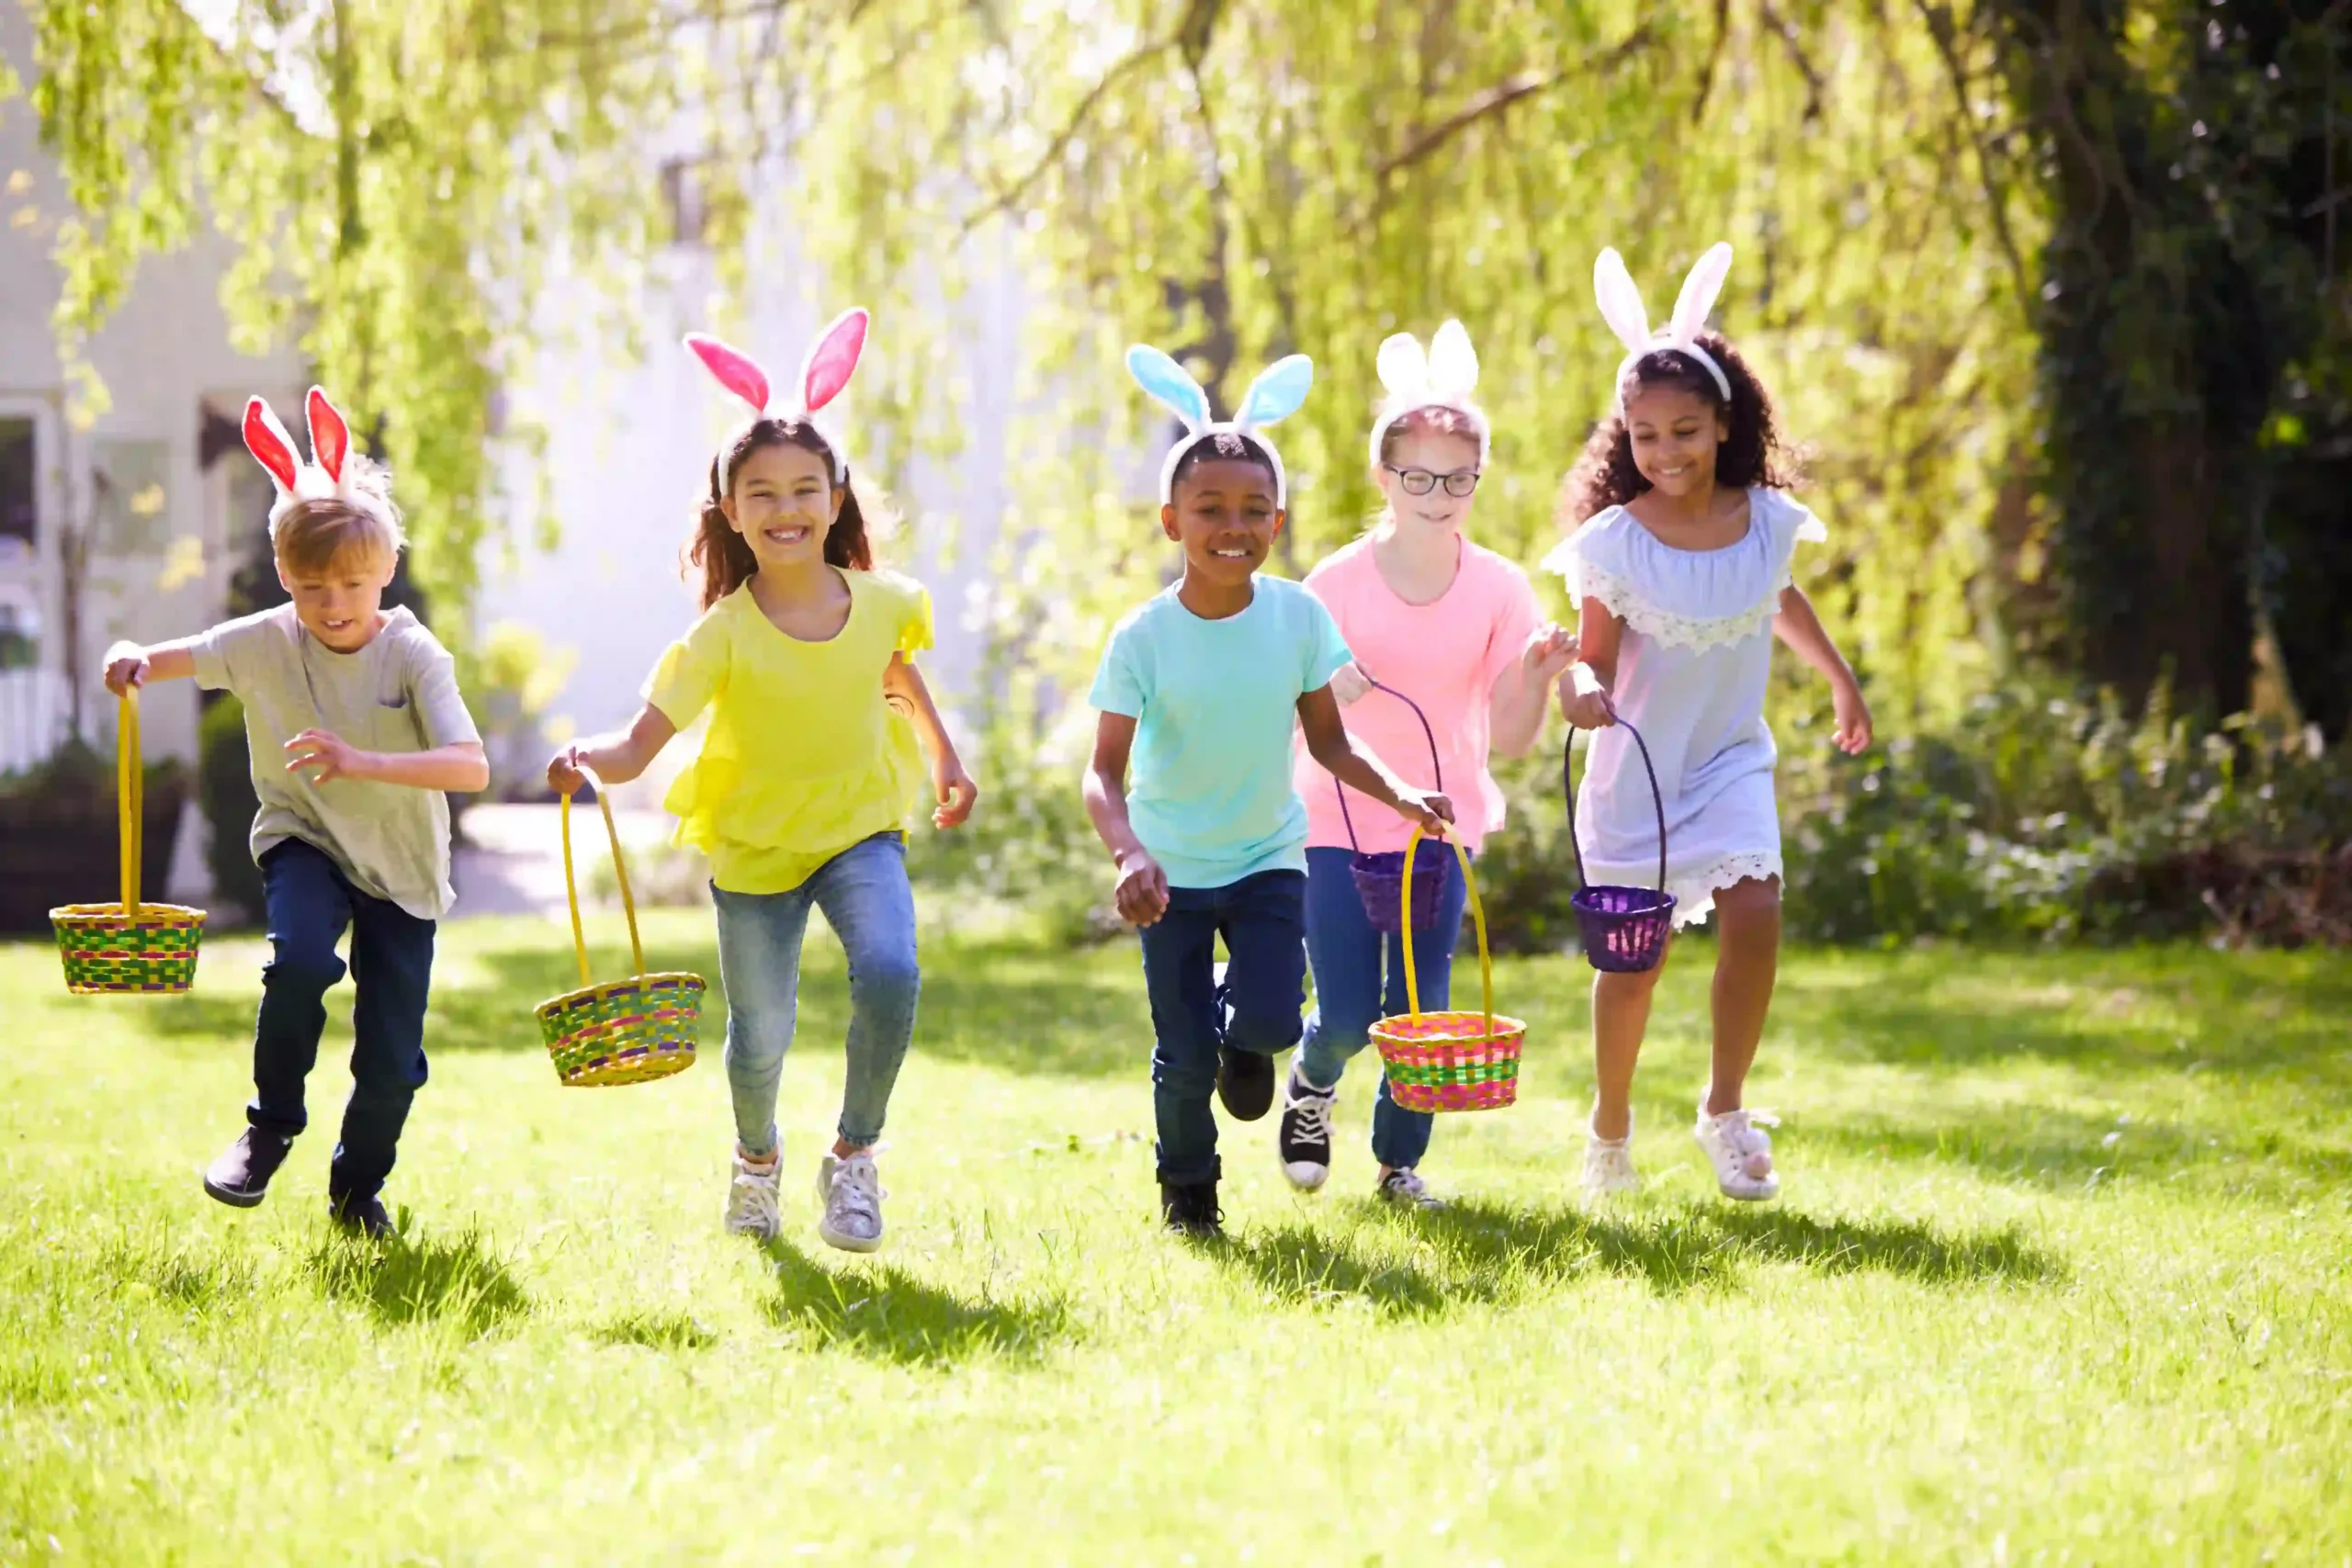 Group of children on an Easter egg hunt in the sun.